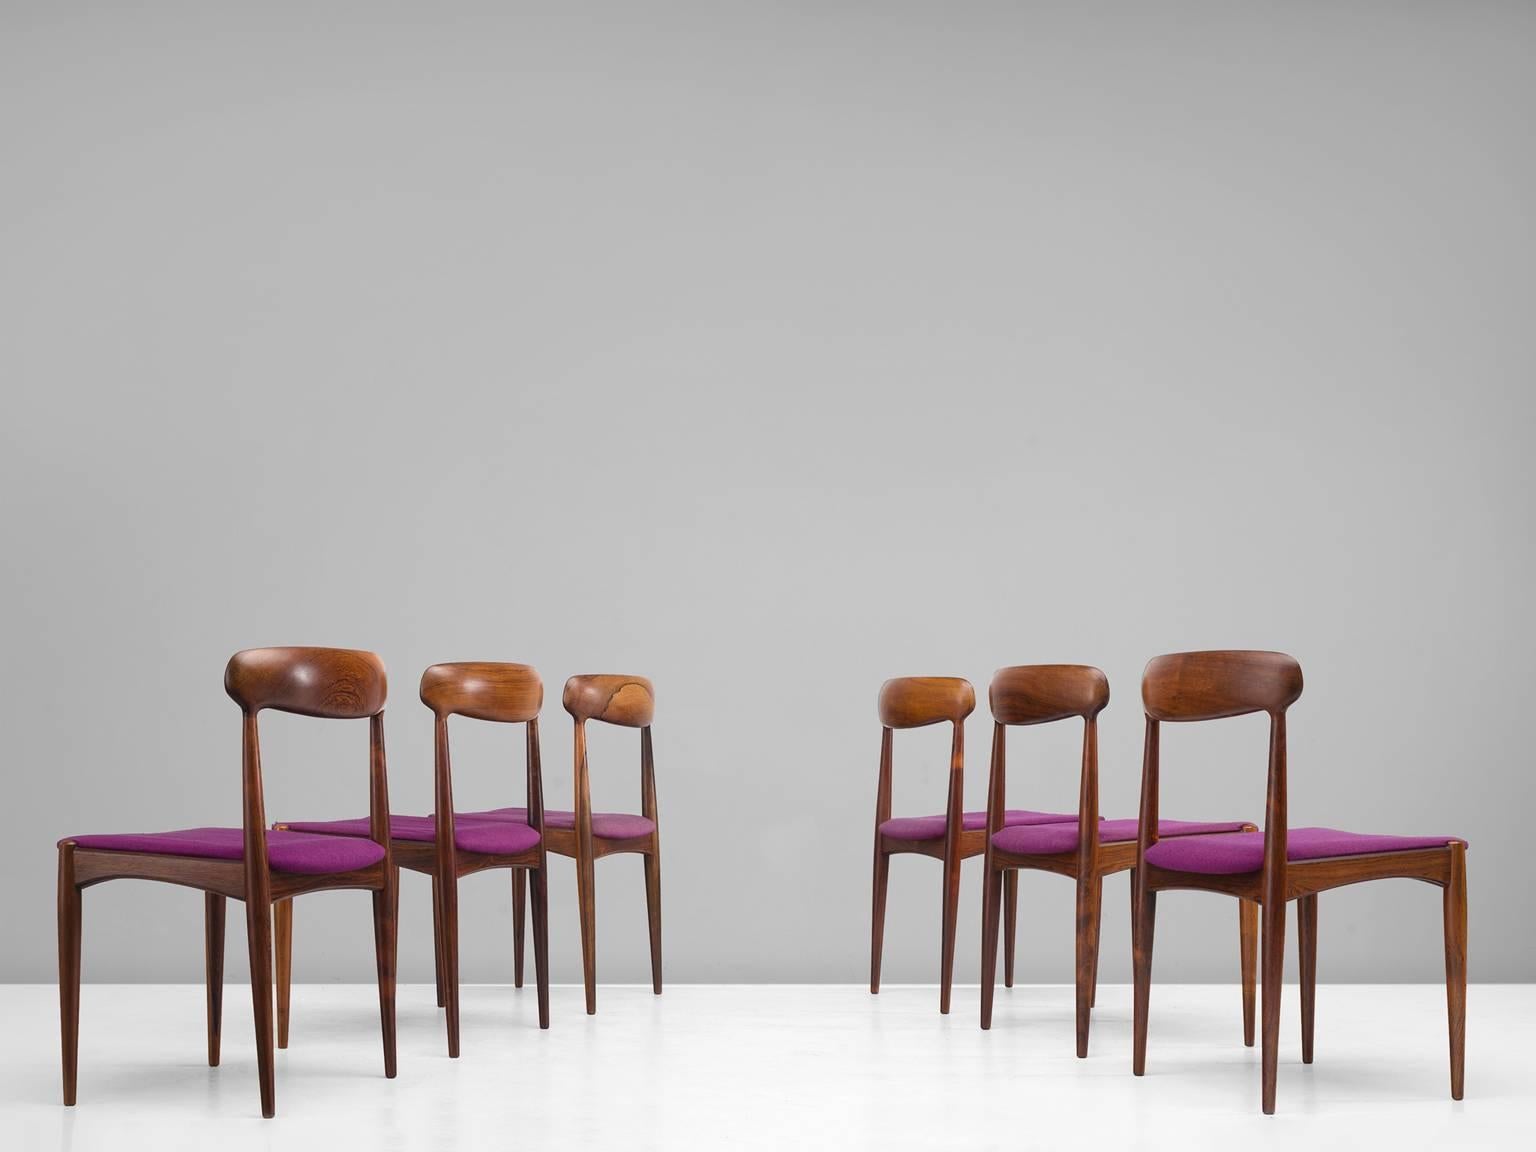 Dining room chairs, rosewood, purple fabric by Johannes Andersen and manufactured Uldum furniture factory, Denmark,1960s.

The restrained chic rosewood dining chairs are soft and warm in their appearance. The backrest is slightly tilted and